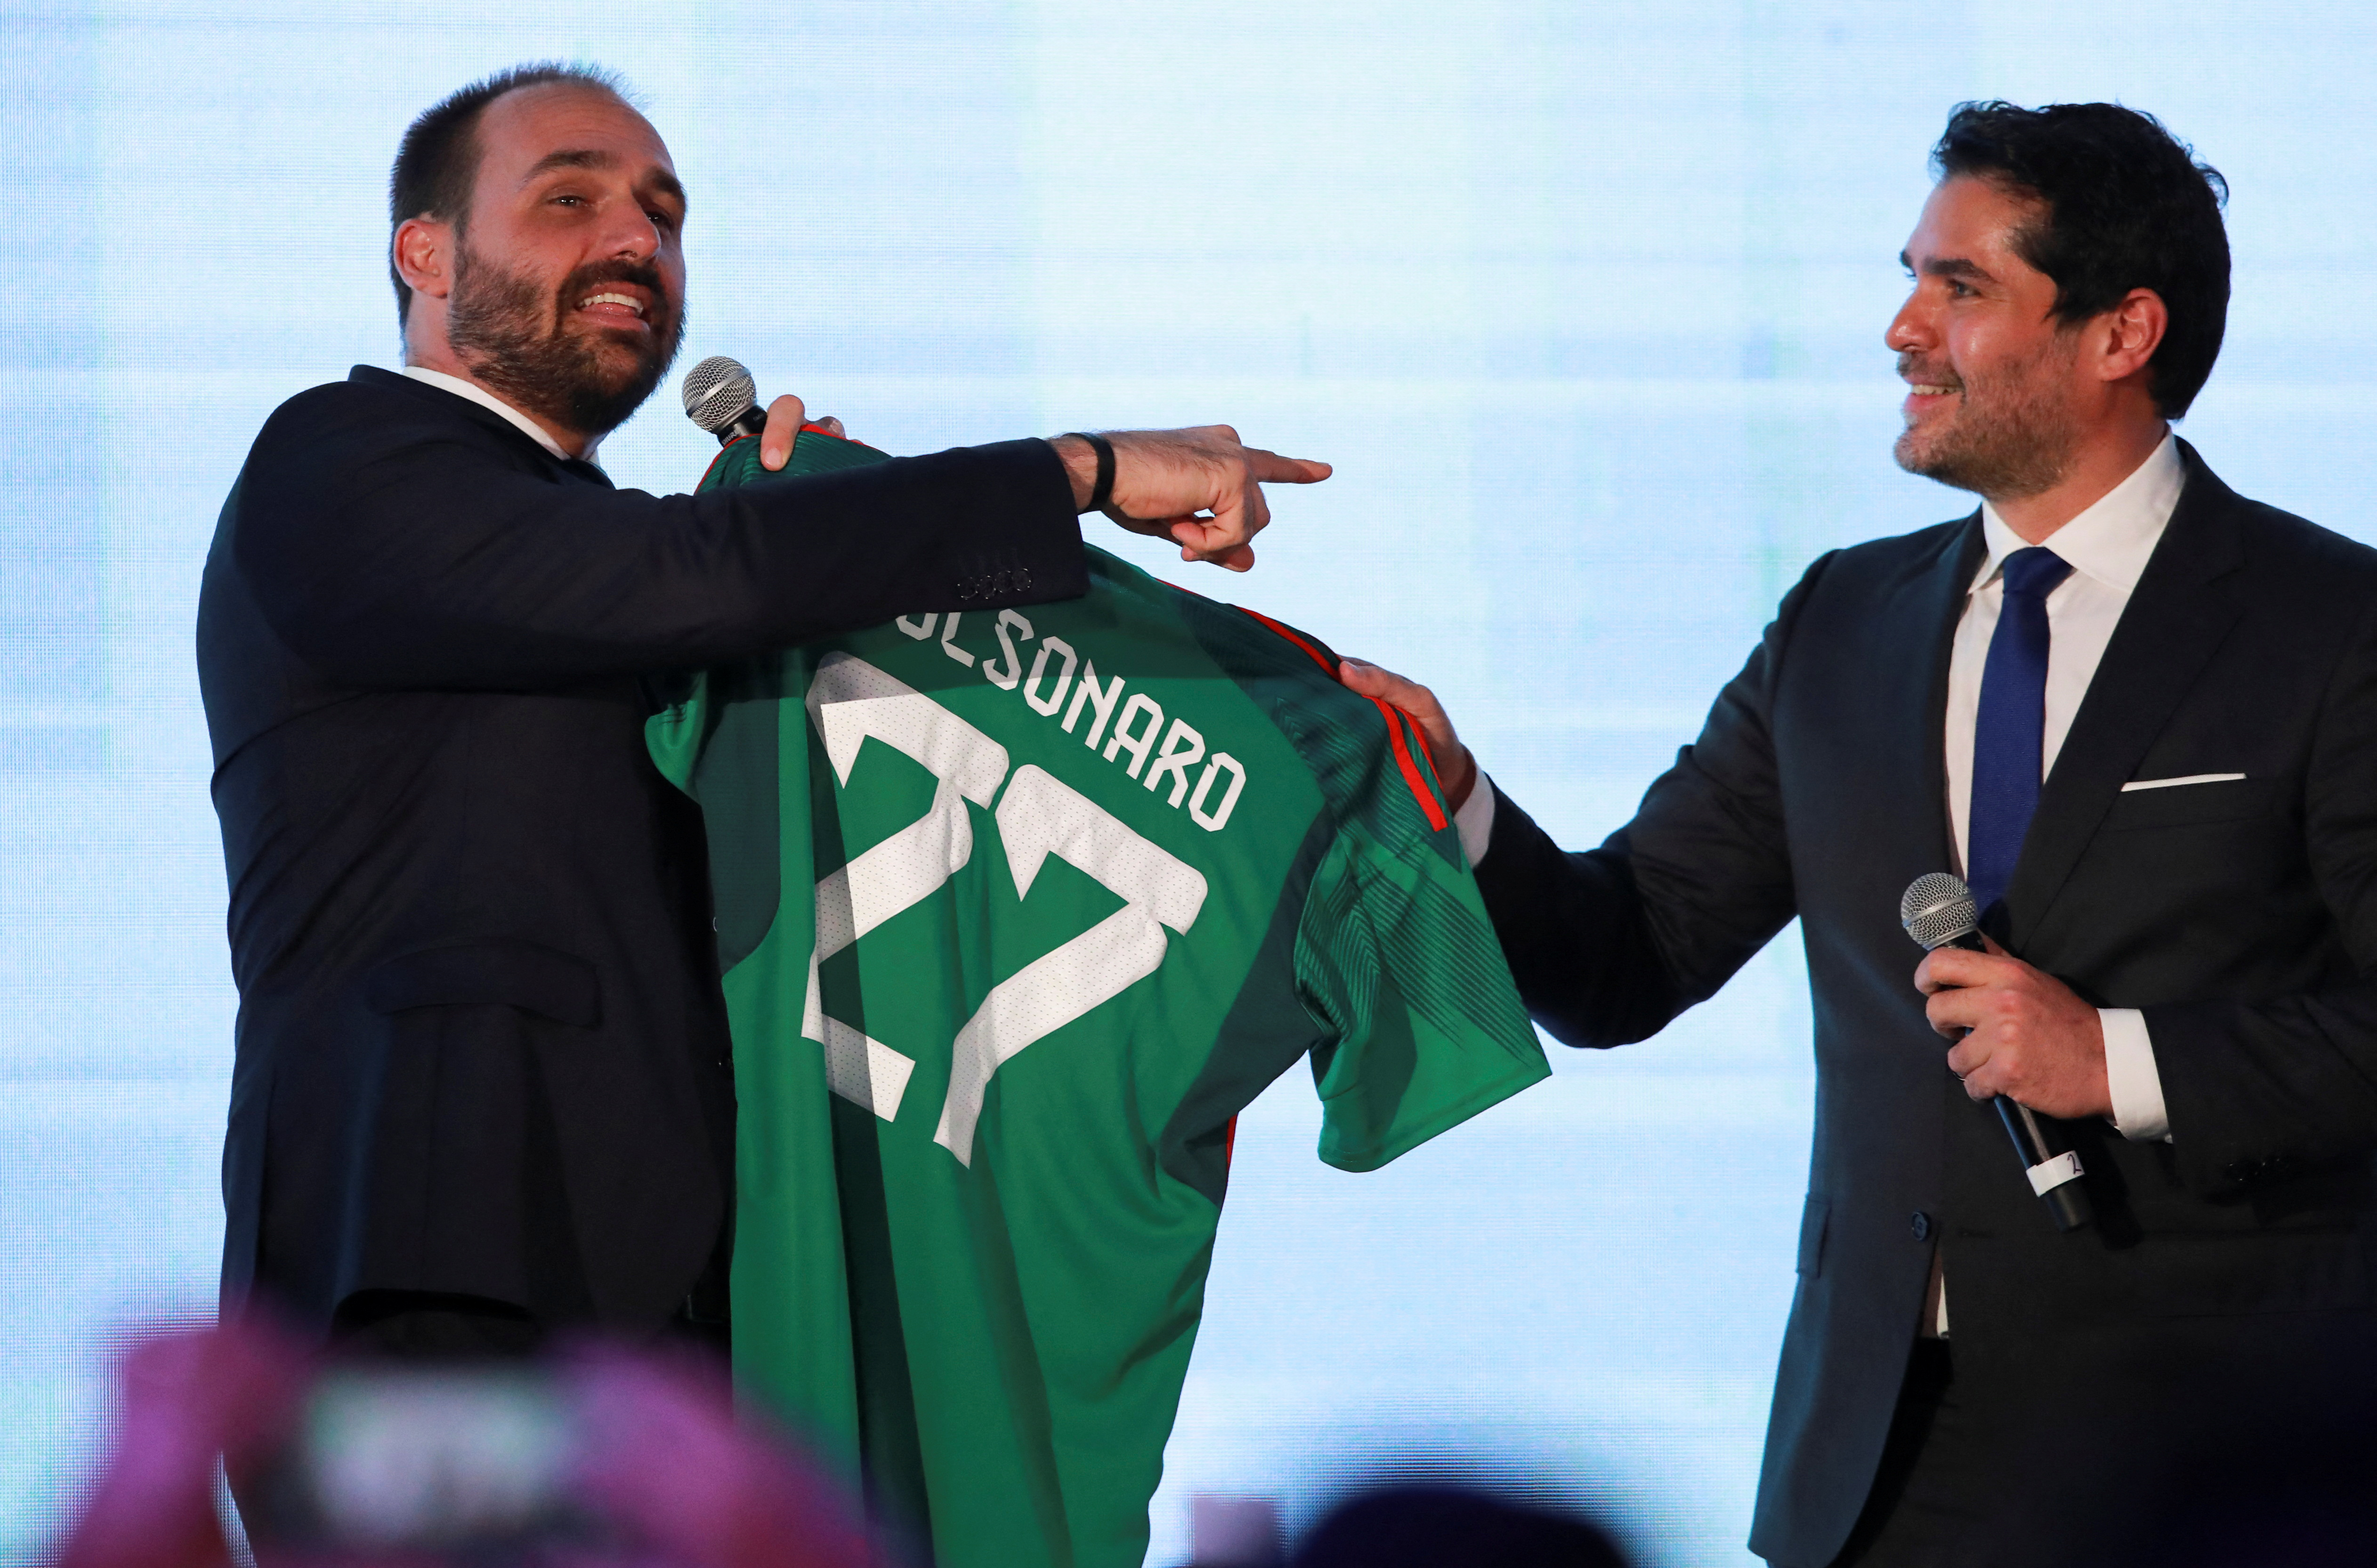 Brazilian politician and lawyer Eduardo Bolsonaro receives a football jersey of the Mexican national team with his name on it from CPAC Mexico's Eduardo Verastegui, after his speech during the Conservative Political Action Conference (CPAC) in Mexico City, Mexico November 18, 2022. REUTERS/ henry romero